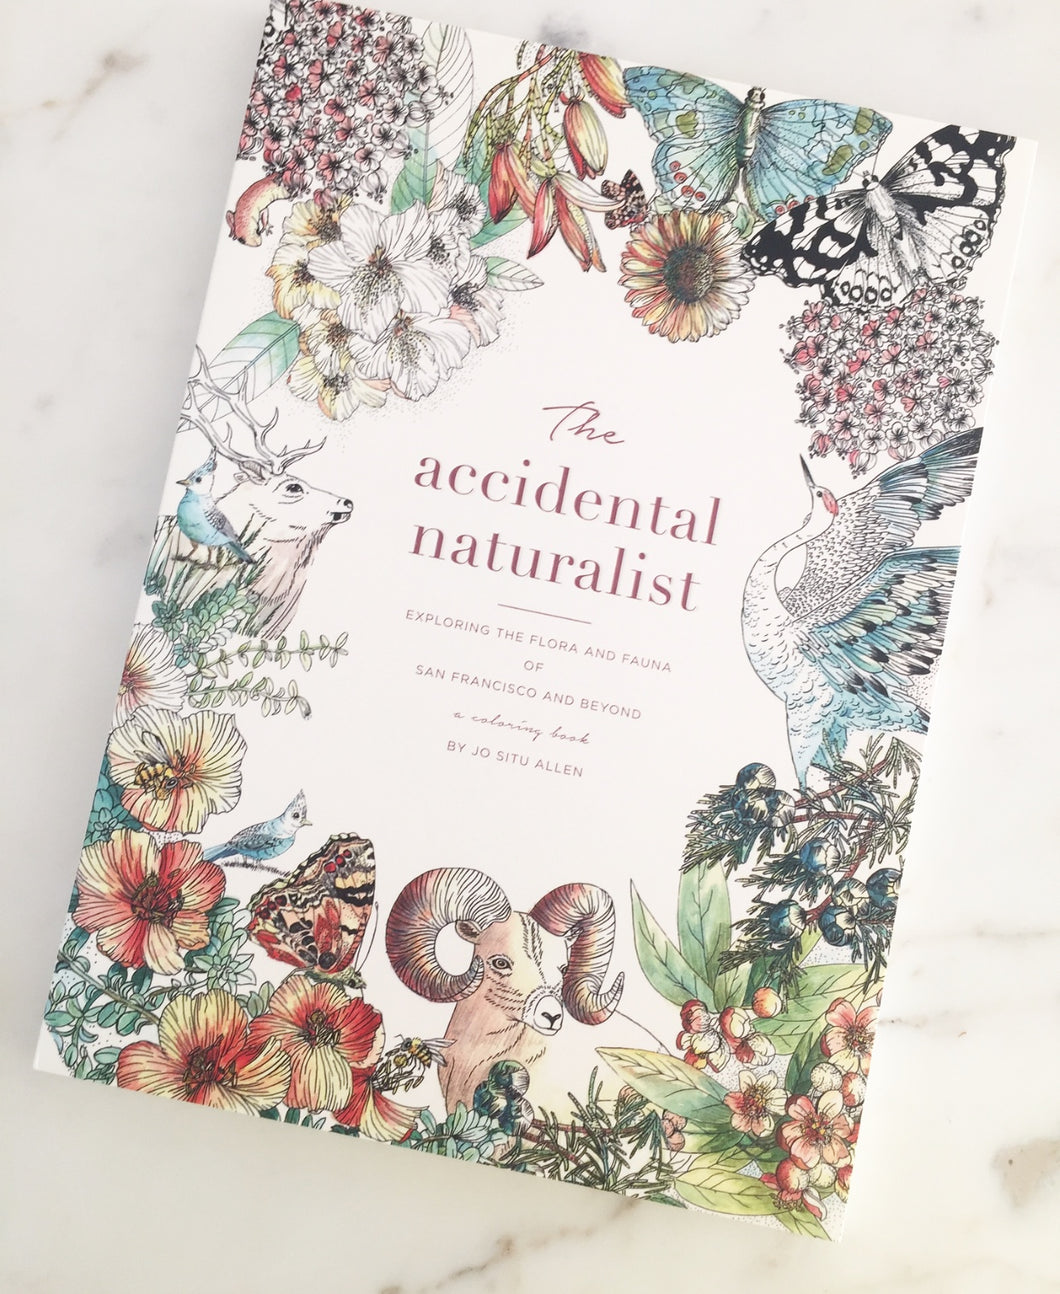 The Accidental Naturalist:  Exploring San Francisco and Beyond